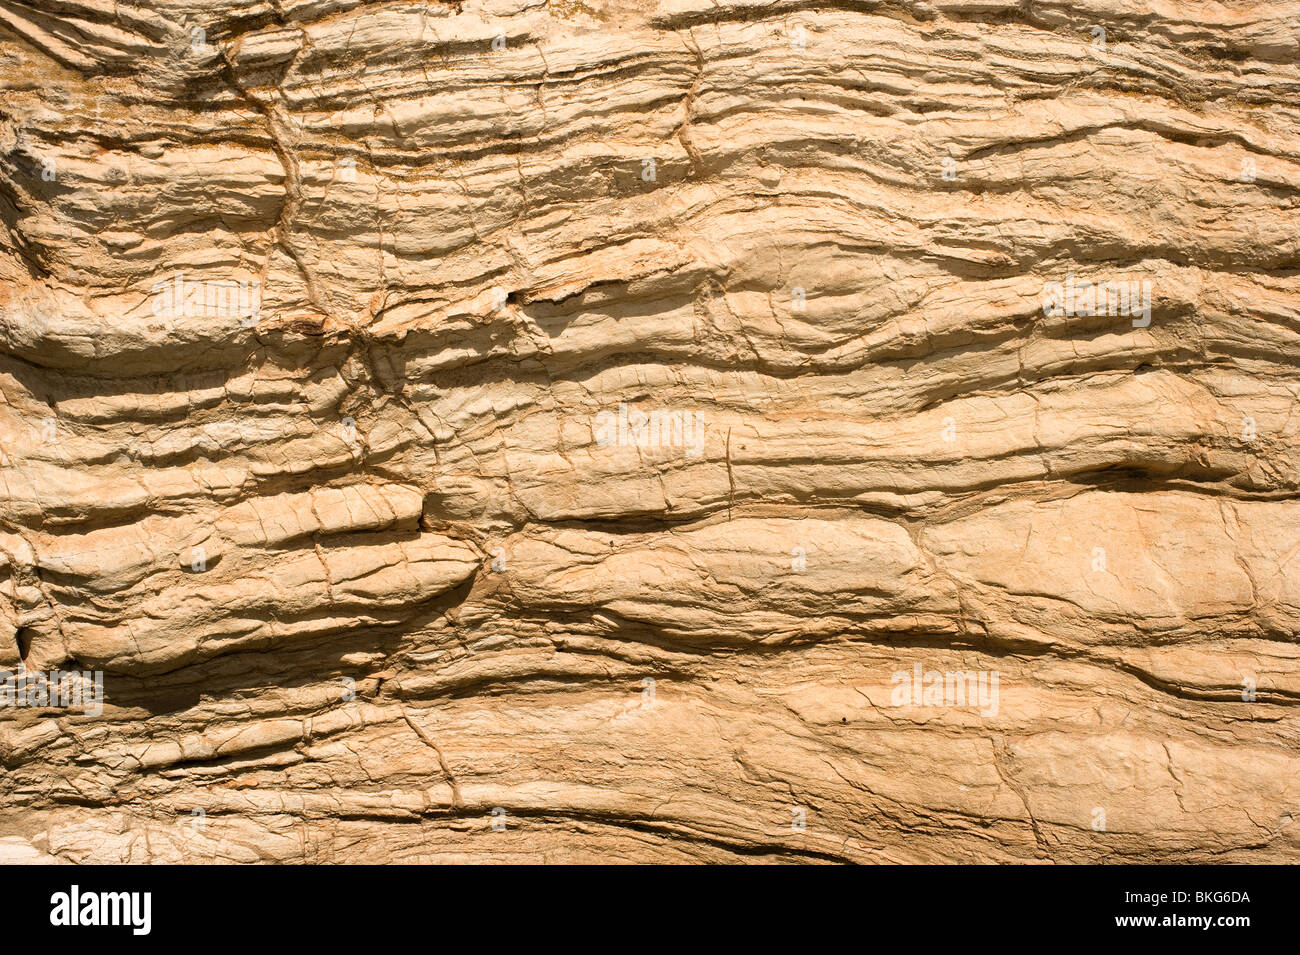 Close up of a rock striation on the side of a mountain. Stock Photo